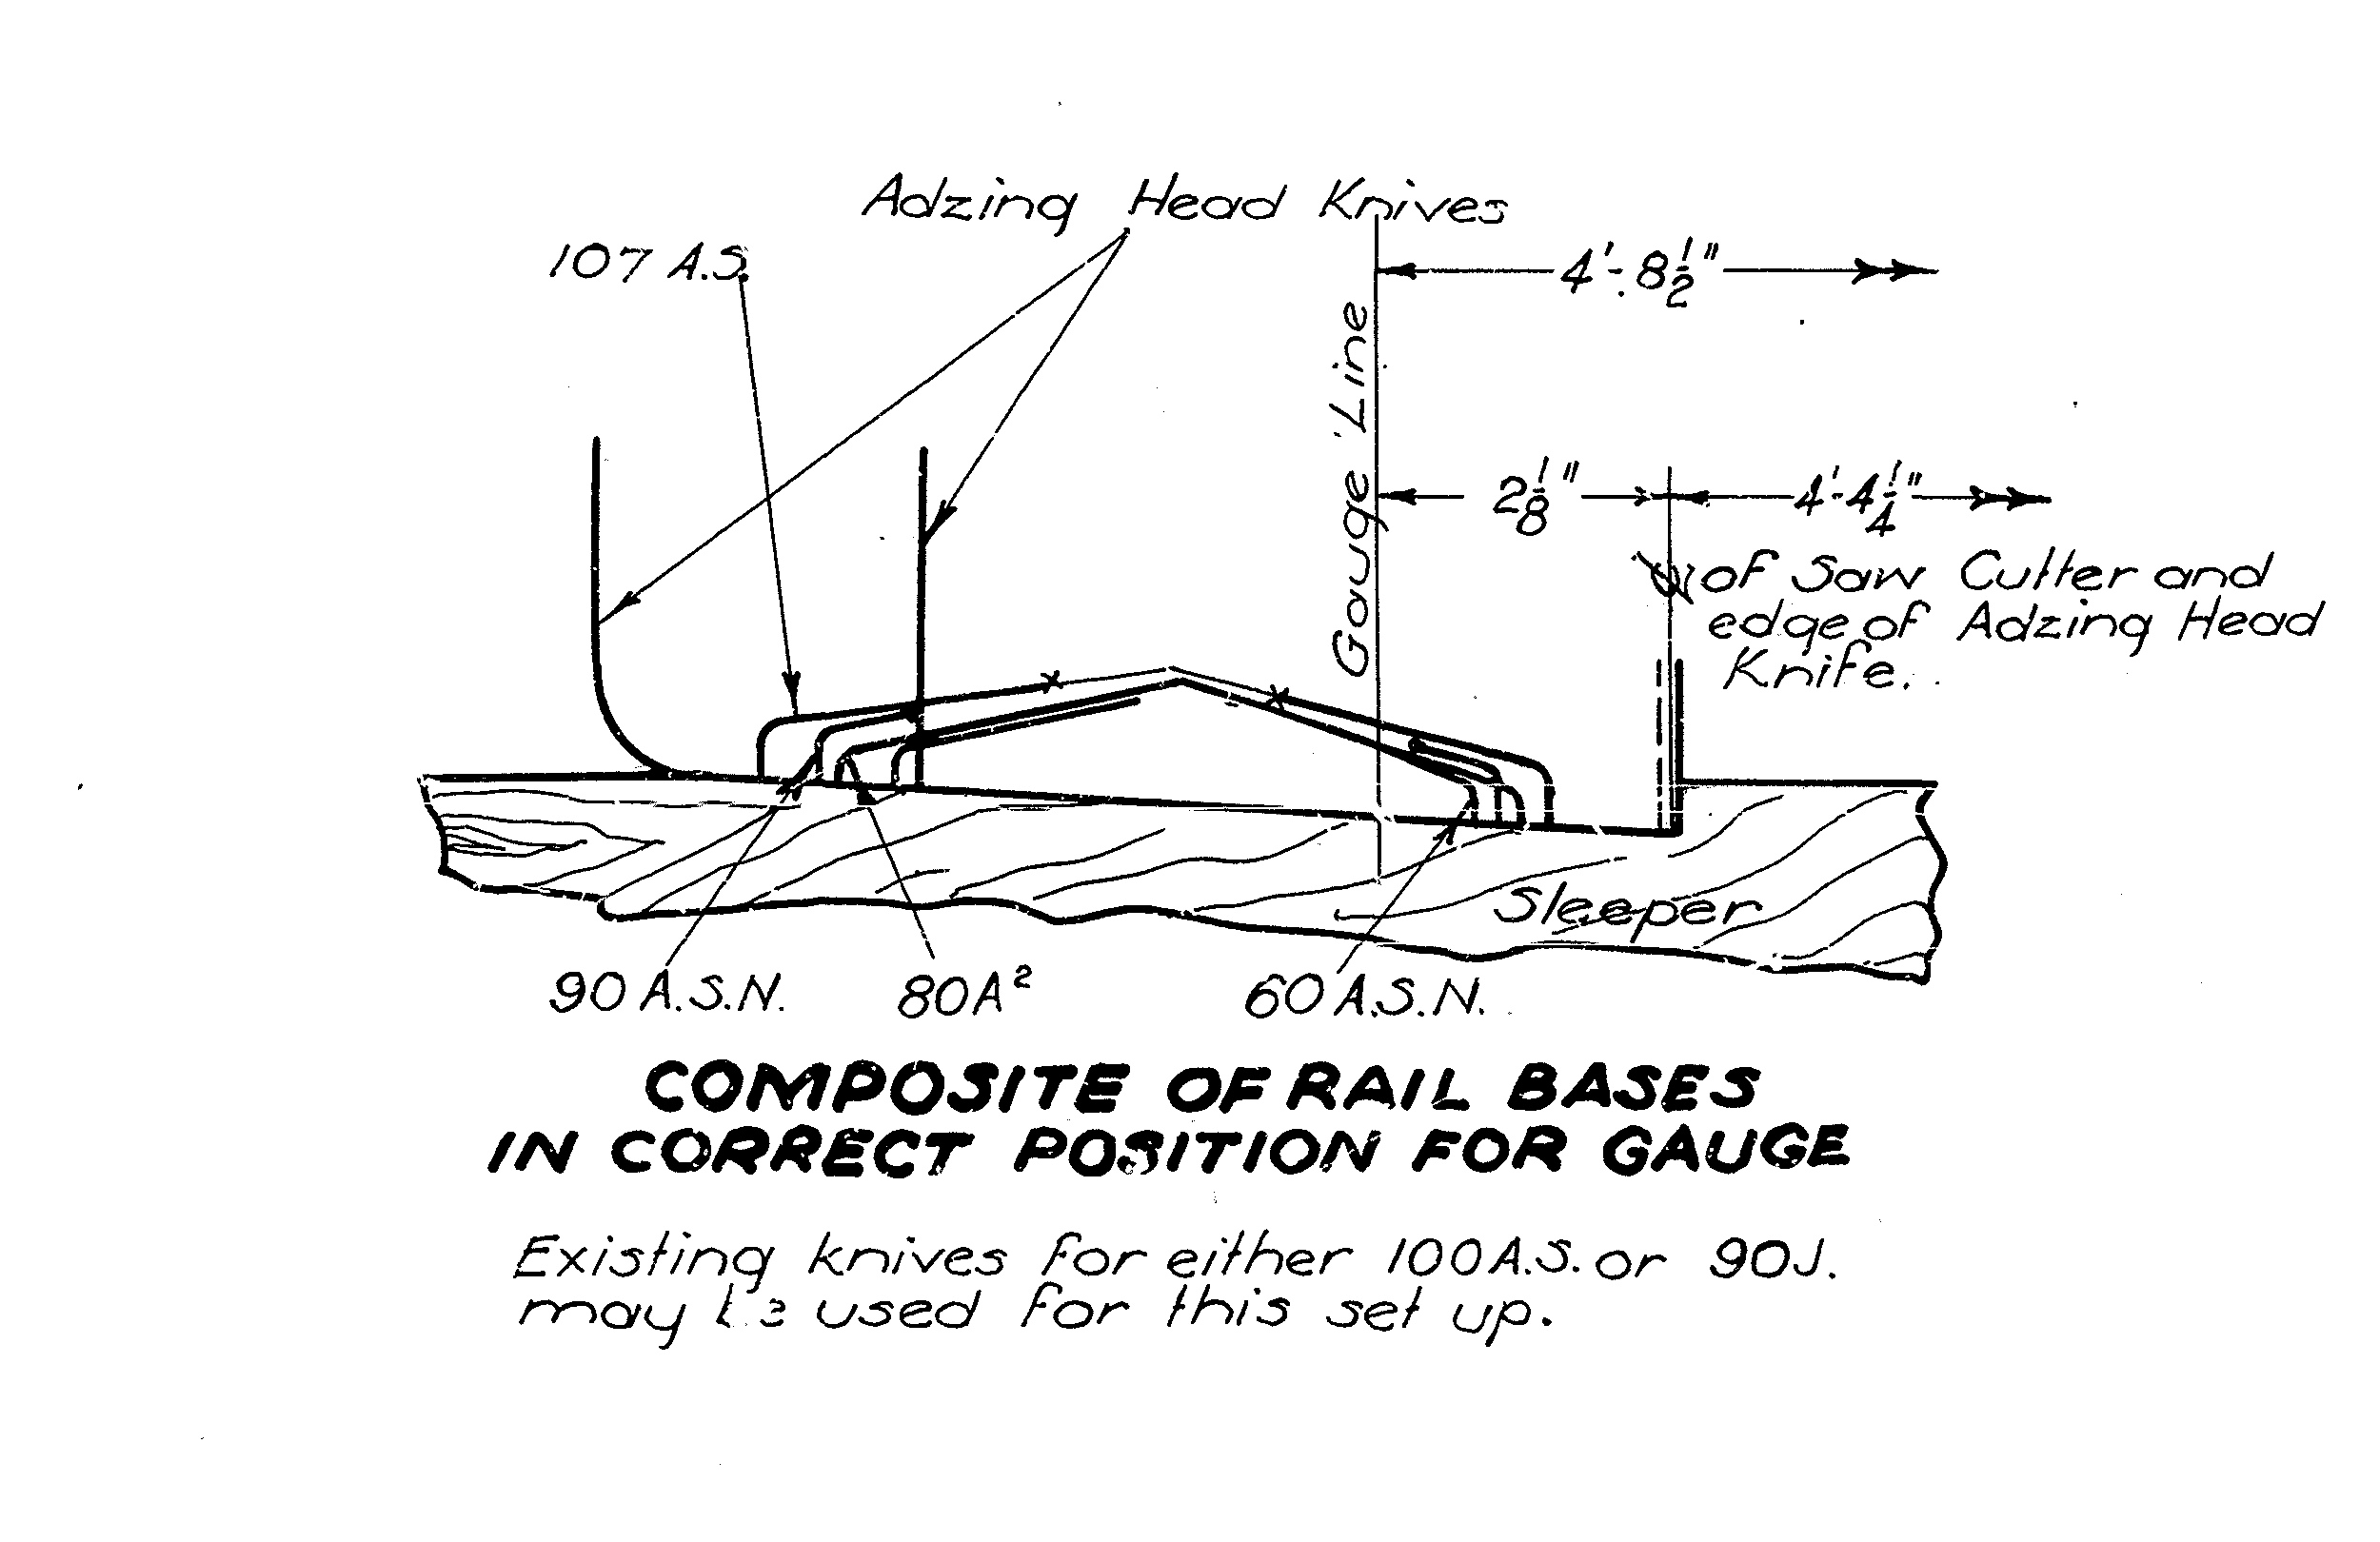 Sleeper Sawing Adzing and Boring Machine composite of rail bases in correct position for gauge.jpg